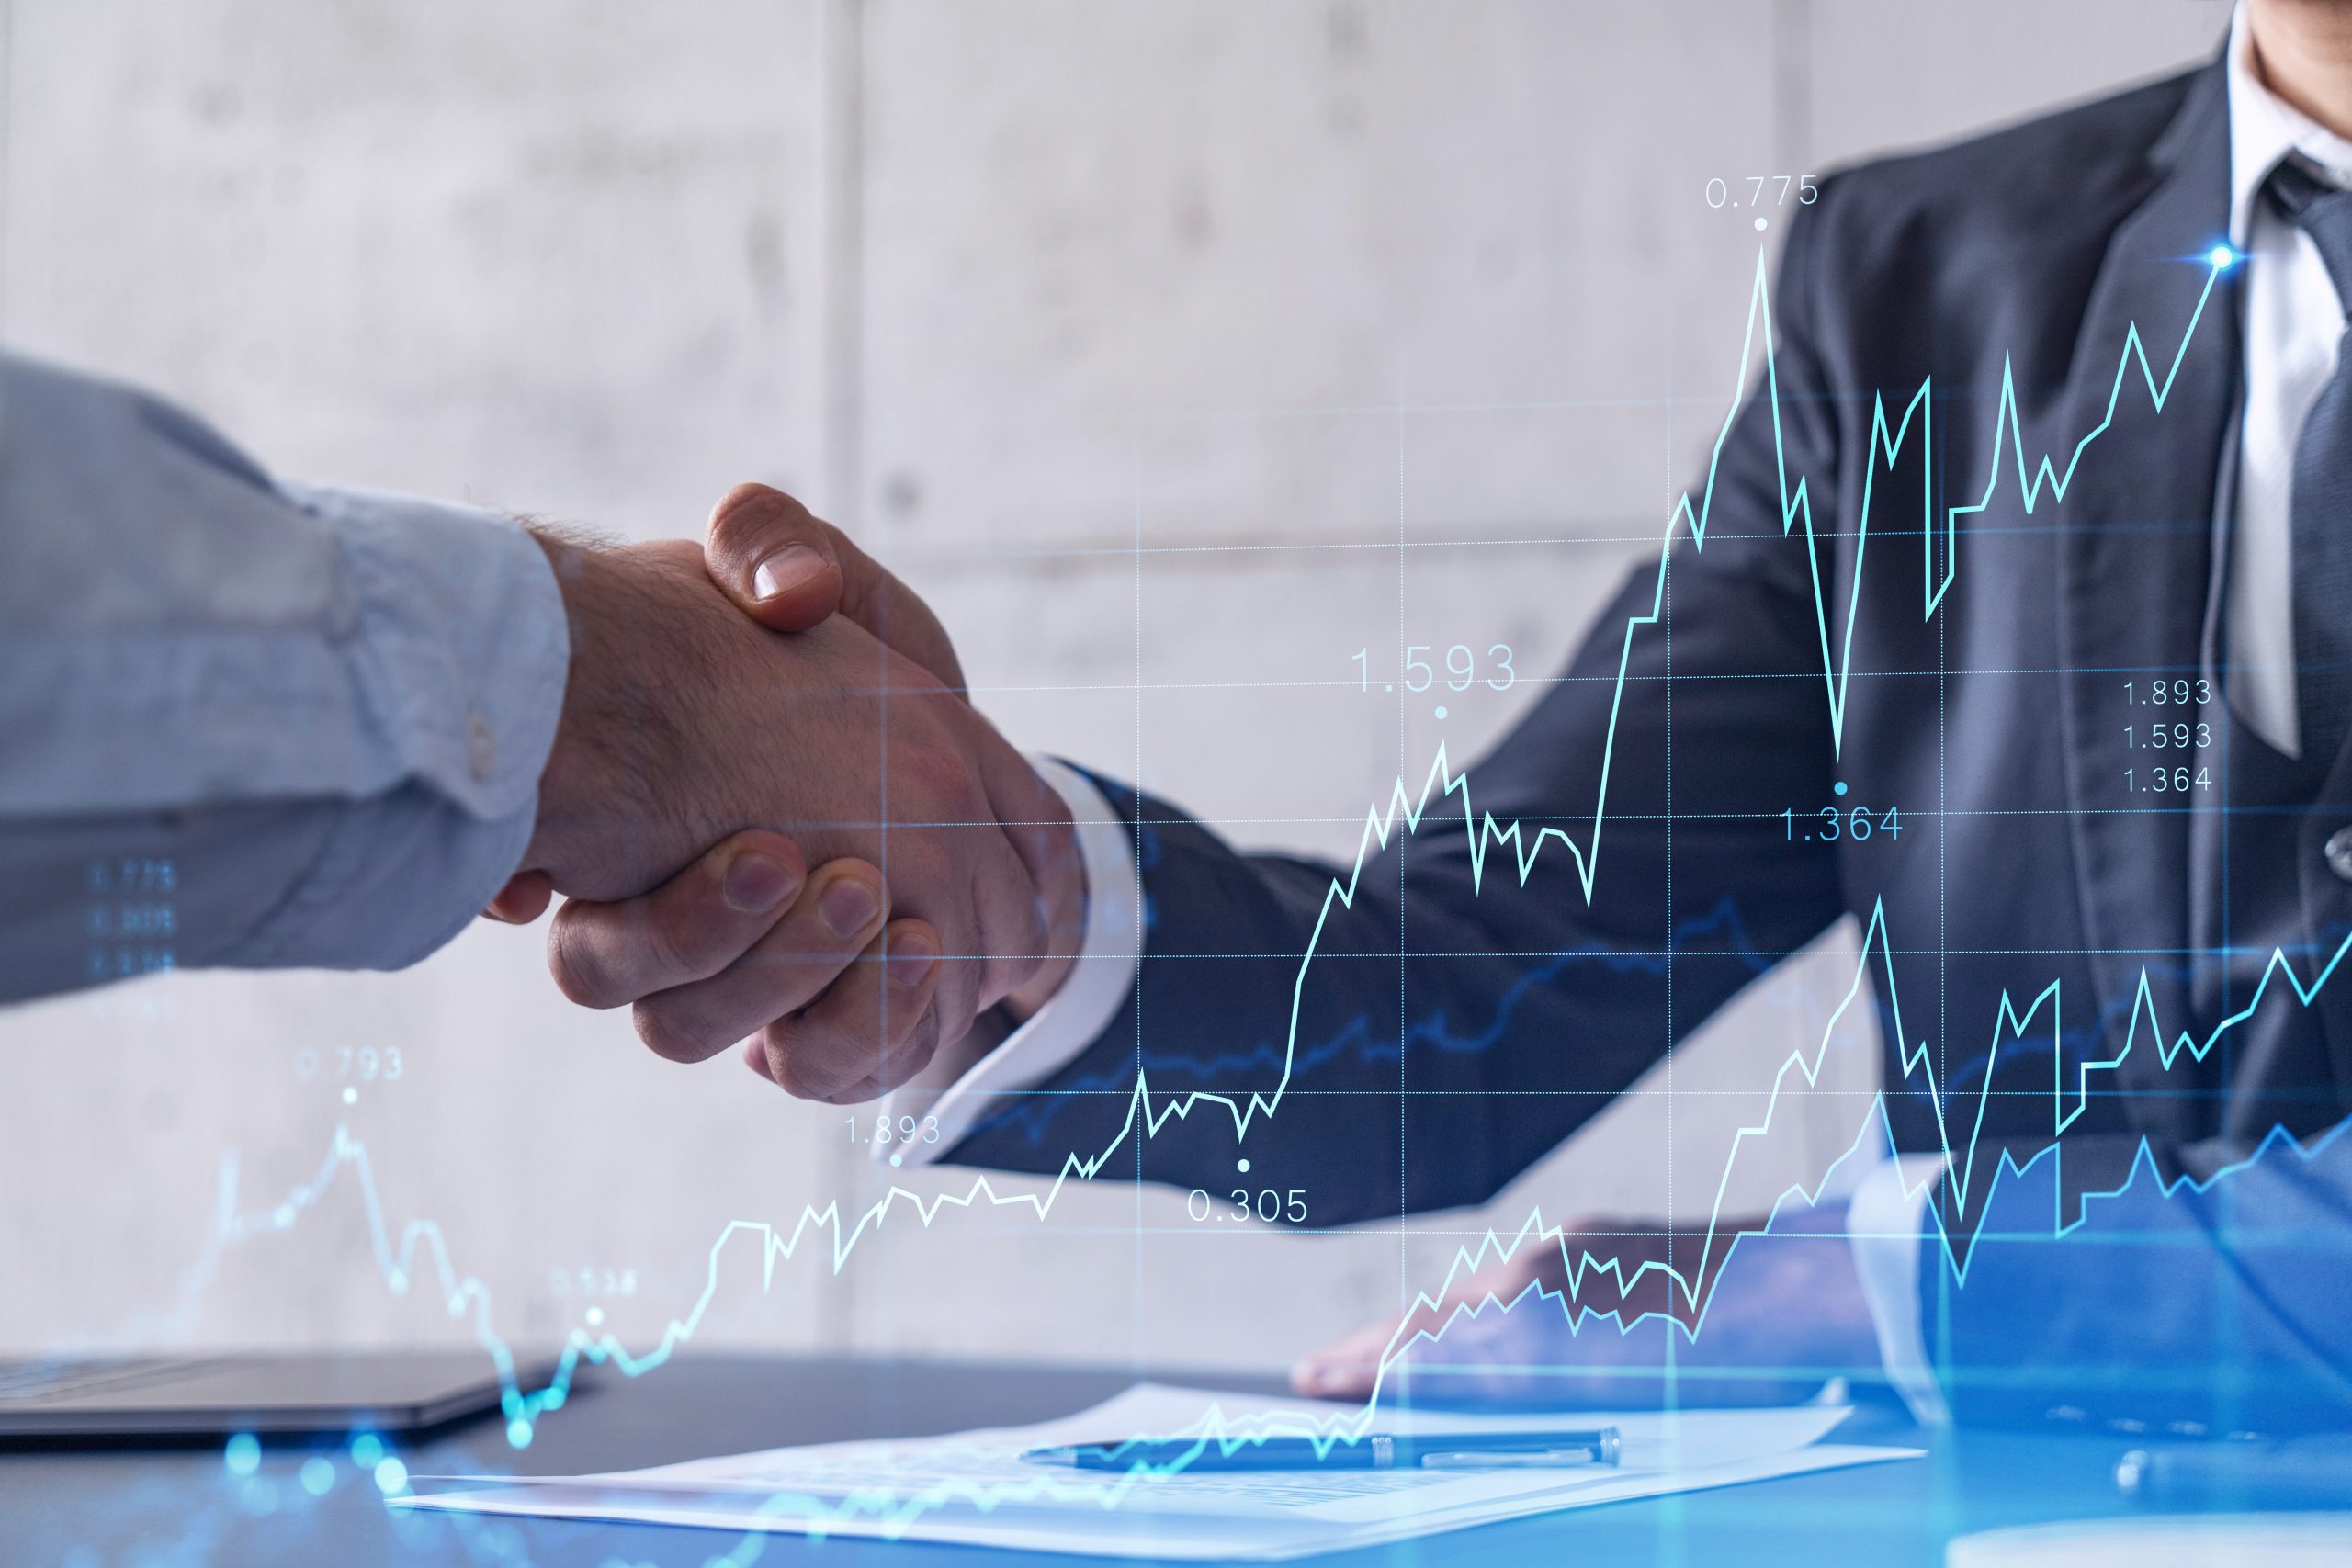 Investor shaking hands with business owner, also with a financial graph overlay in image